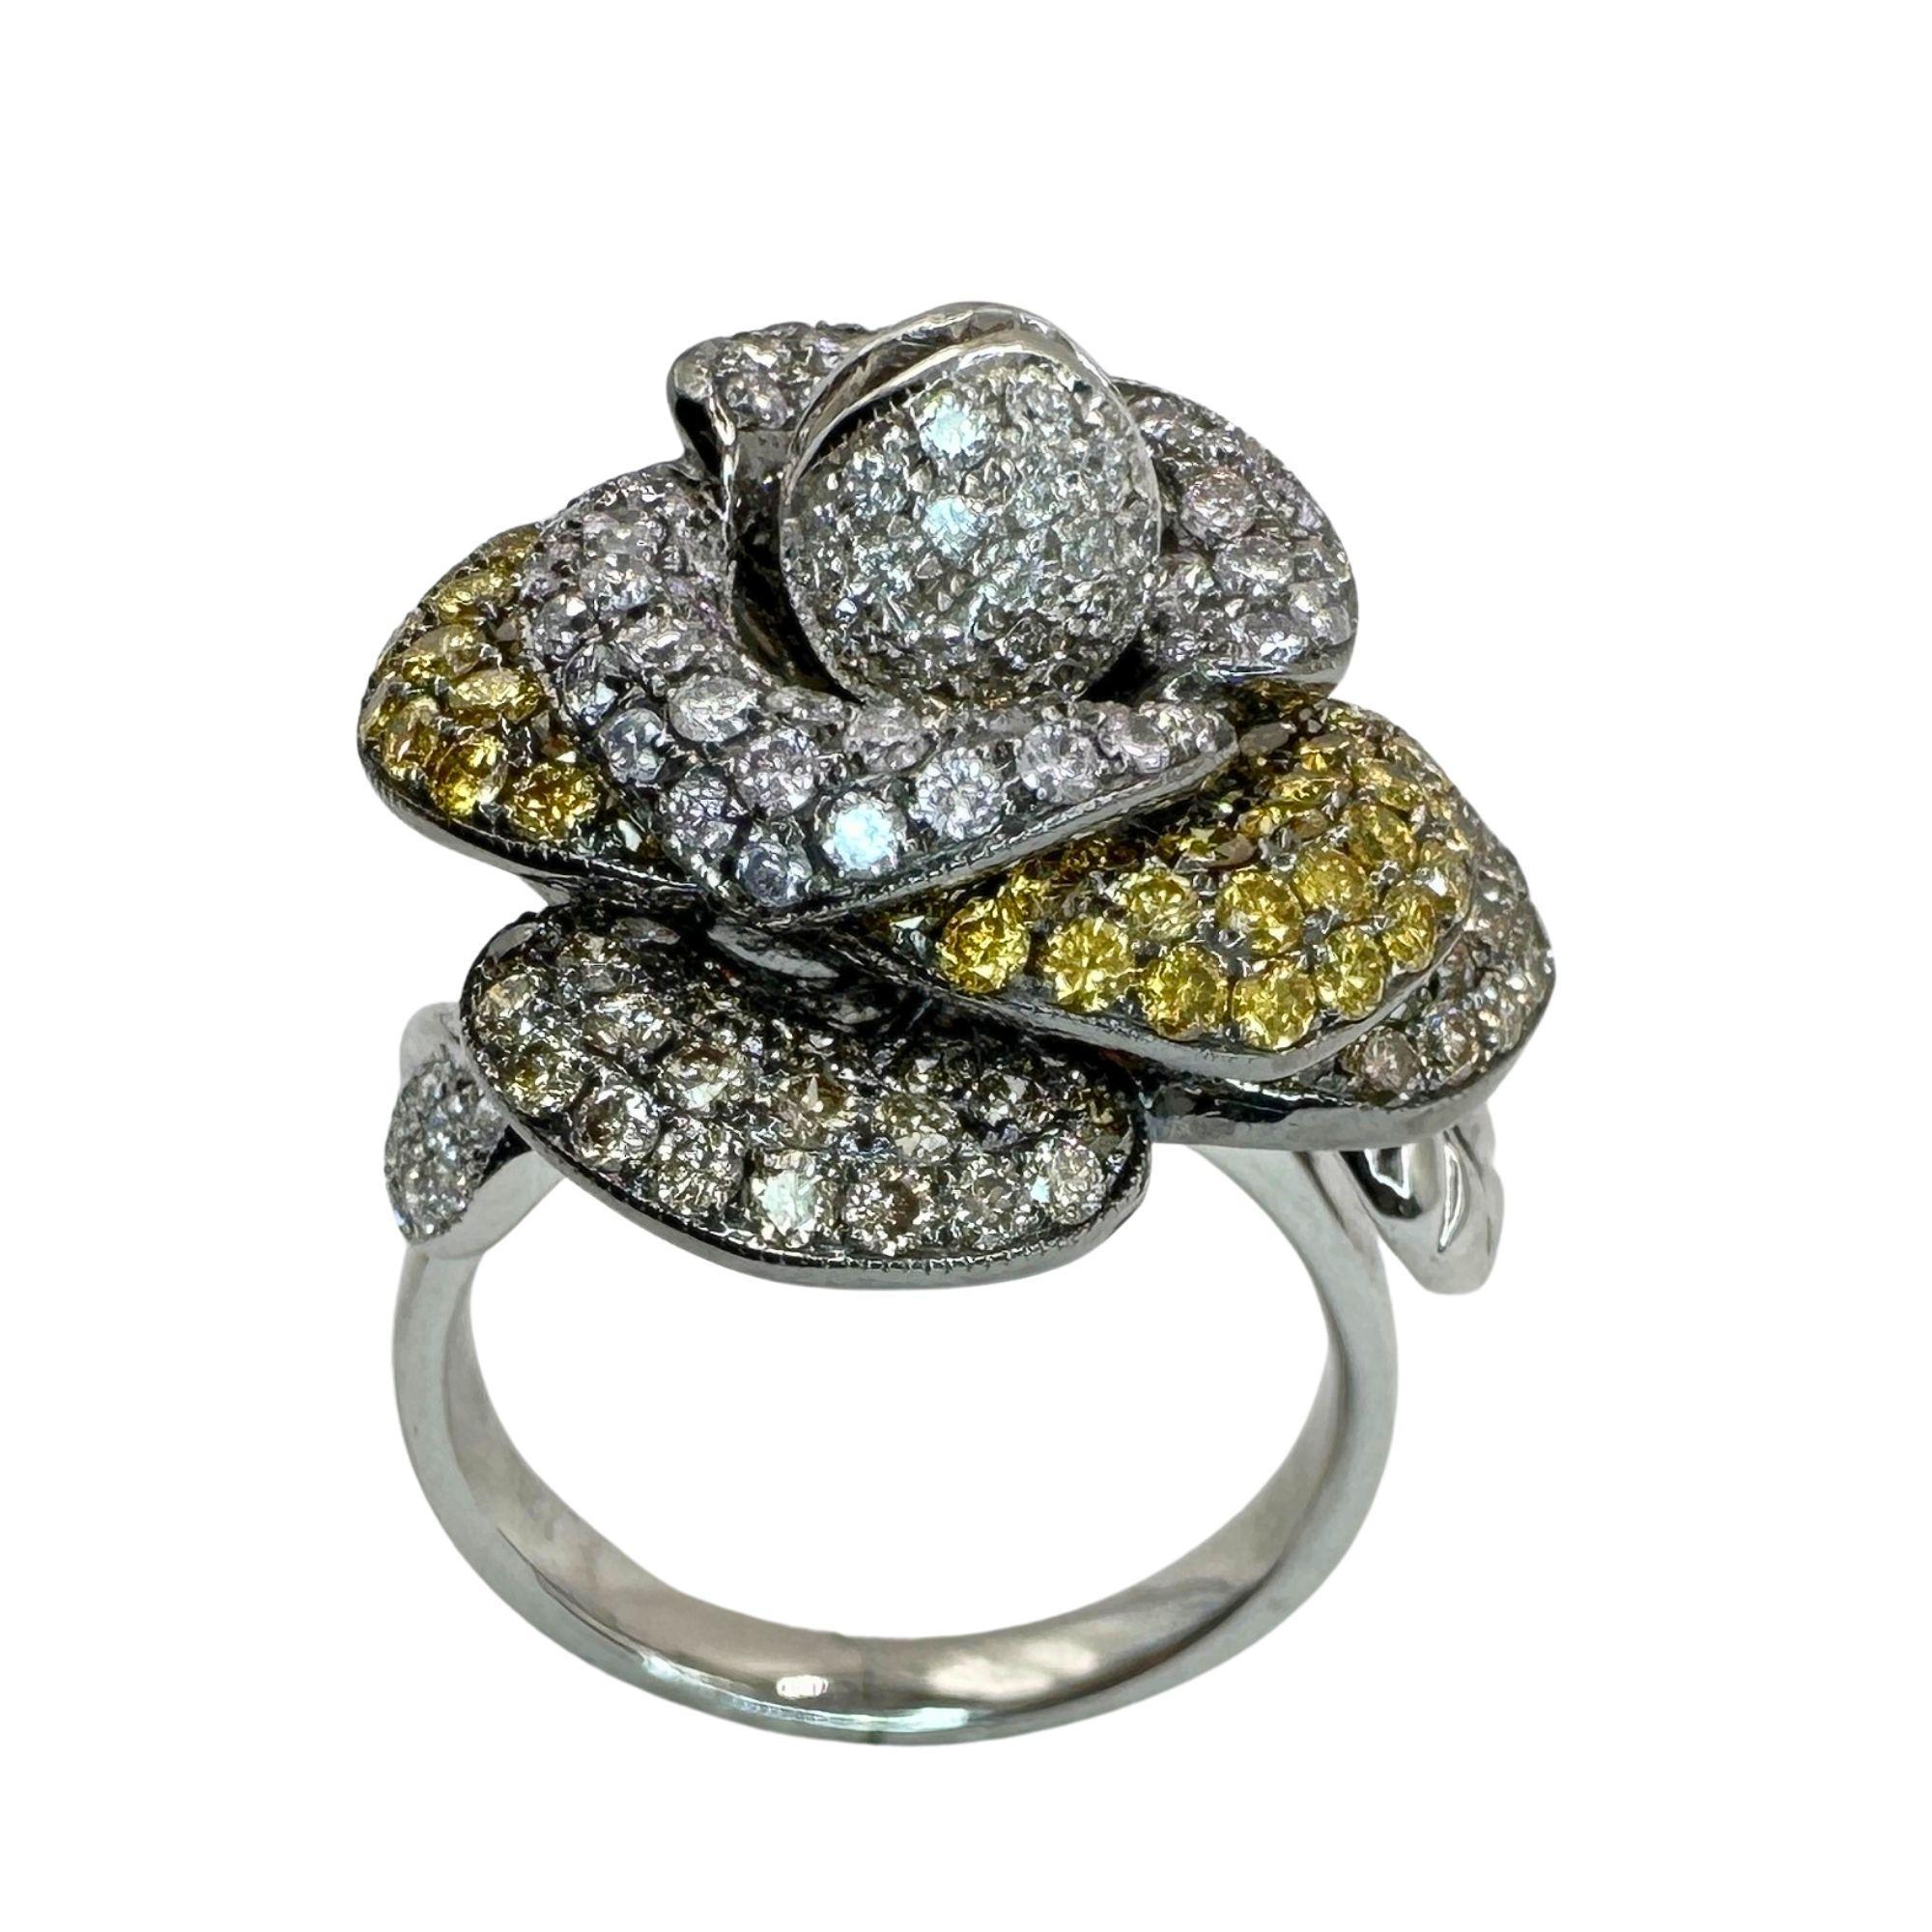 Expertly crafted from 18k white gold, this stunning flower ring features a combination of irradiated yellow, natural brown, and natural white diamonds. With a total weight of 2.71 carats, this ring is sure to make a statement. In excellent condition